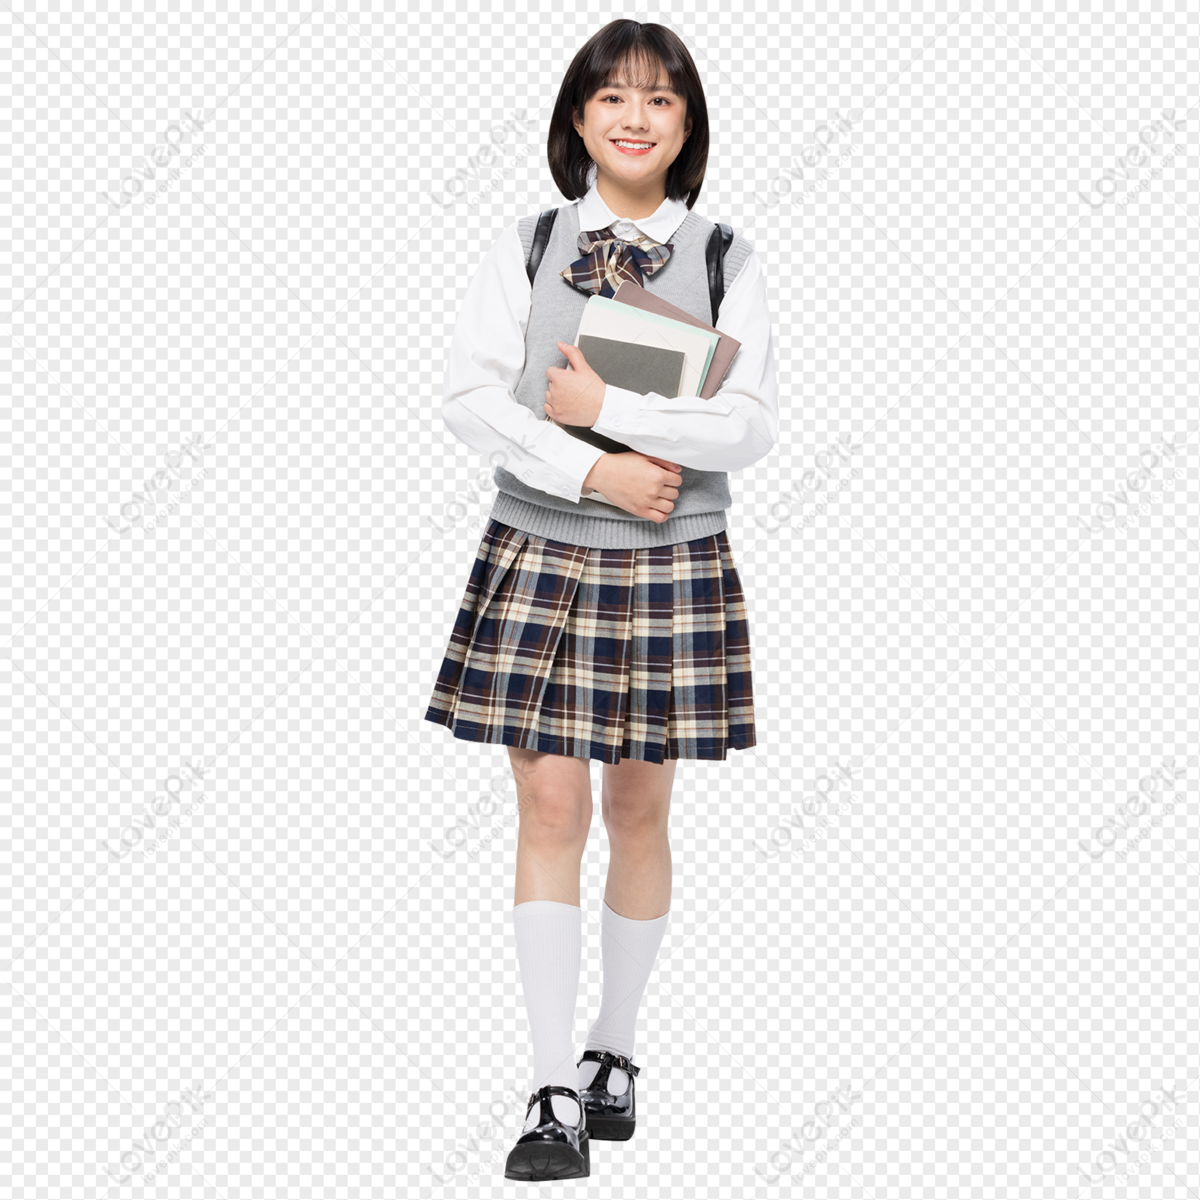 Sweet Japanese female college student holding a book, young, book, holding book png transparent image